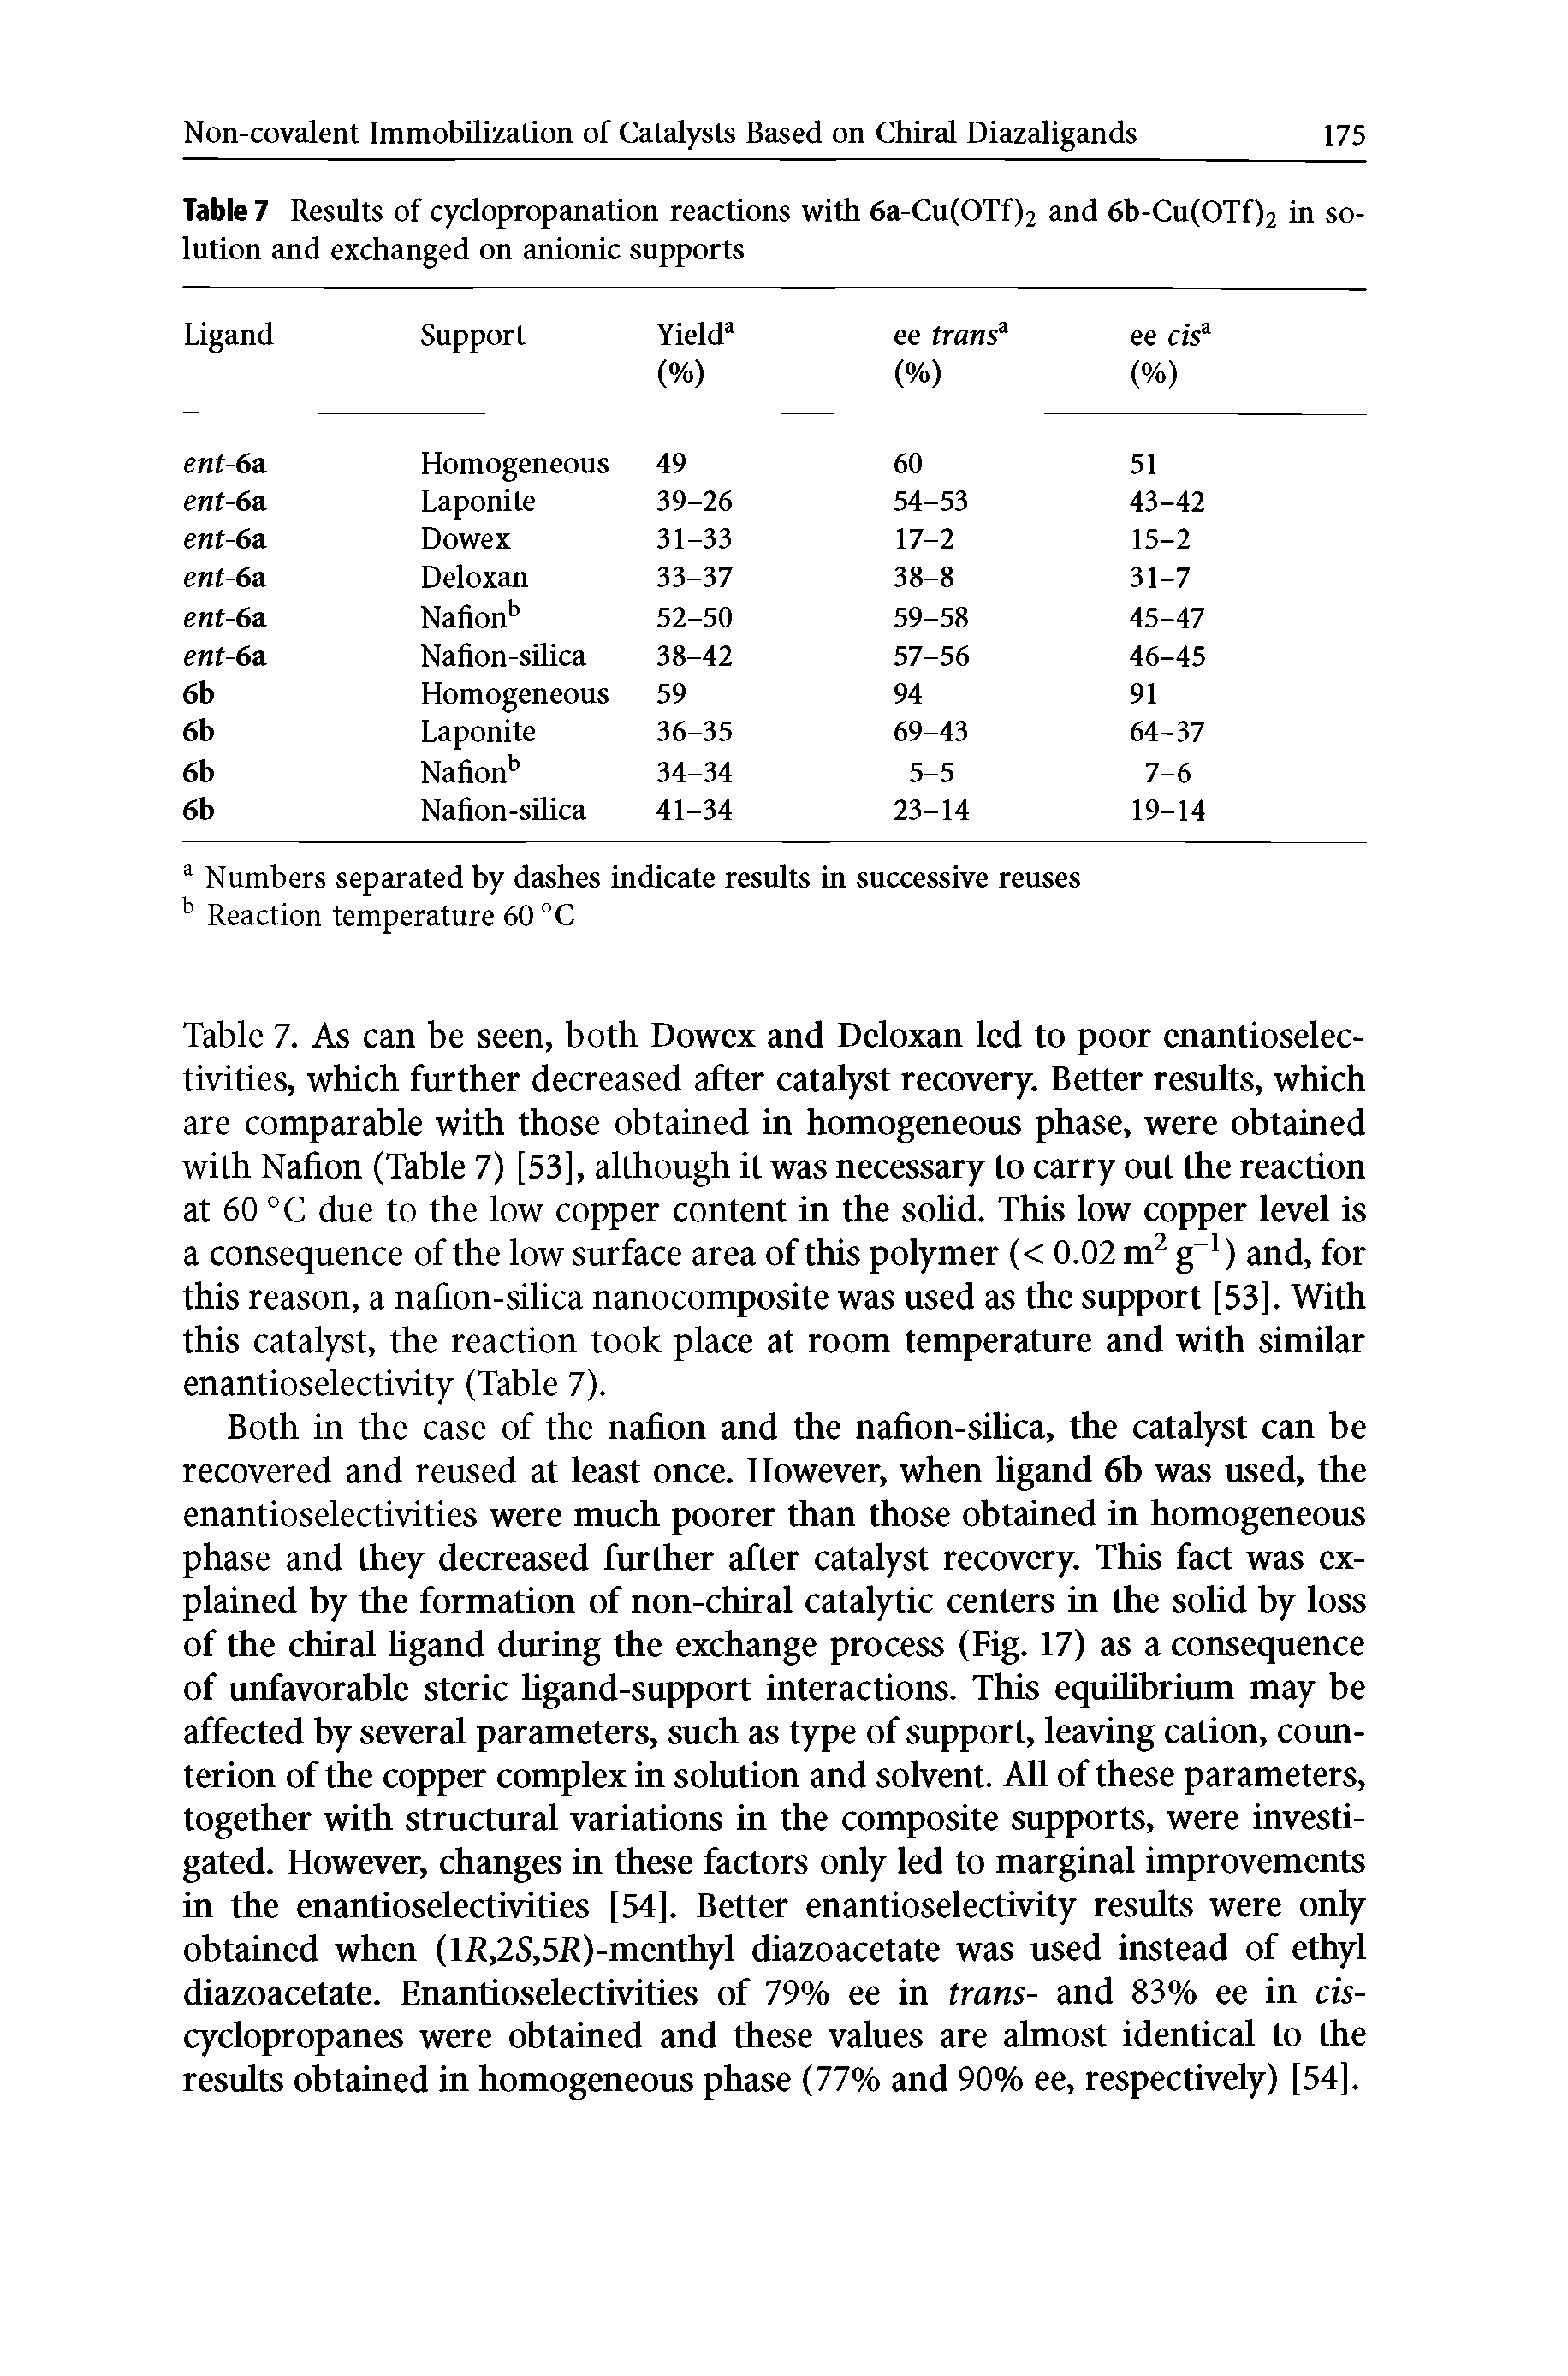 Table 7. As can be seen, both Dowex and Deloxan led to poor enantioselec-tivities, which further decreased after catalyst recovery. Better results, which are comparable with those obtained in homogeneous phase, were obtained with Nation (Table 7) [53], although it was necessary to carry out the reaction at 60 °C due to the low copper content in the soHd. This low copper level is a consequence of the low surface area of this polymer (< 0.02 m g ) and, for this reason, a nafion-silica nanocomposite was used as the support [53]. With this catalyst, the reaction took place at room temperature and with similar enantioselectivity (Table 7).